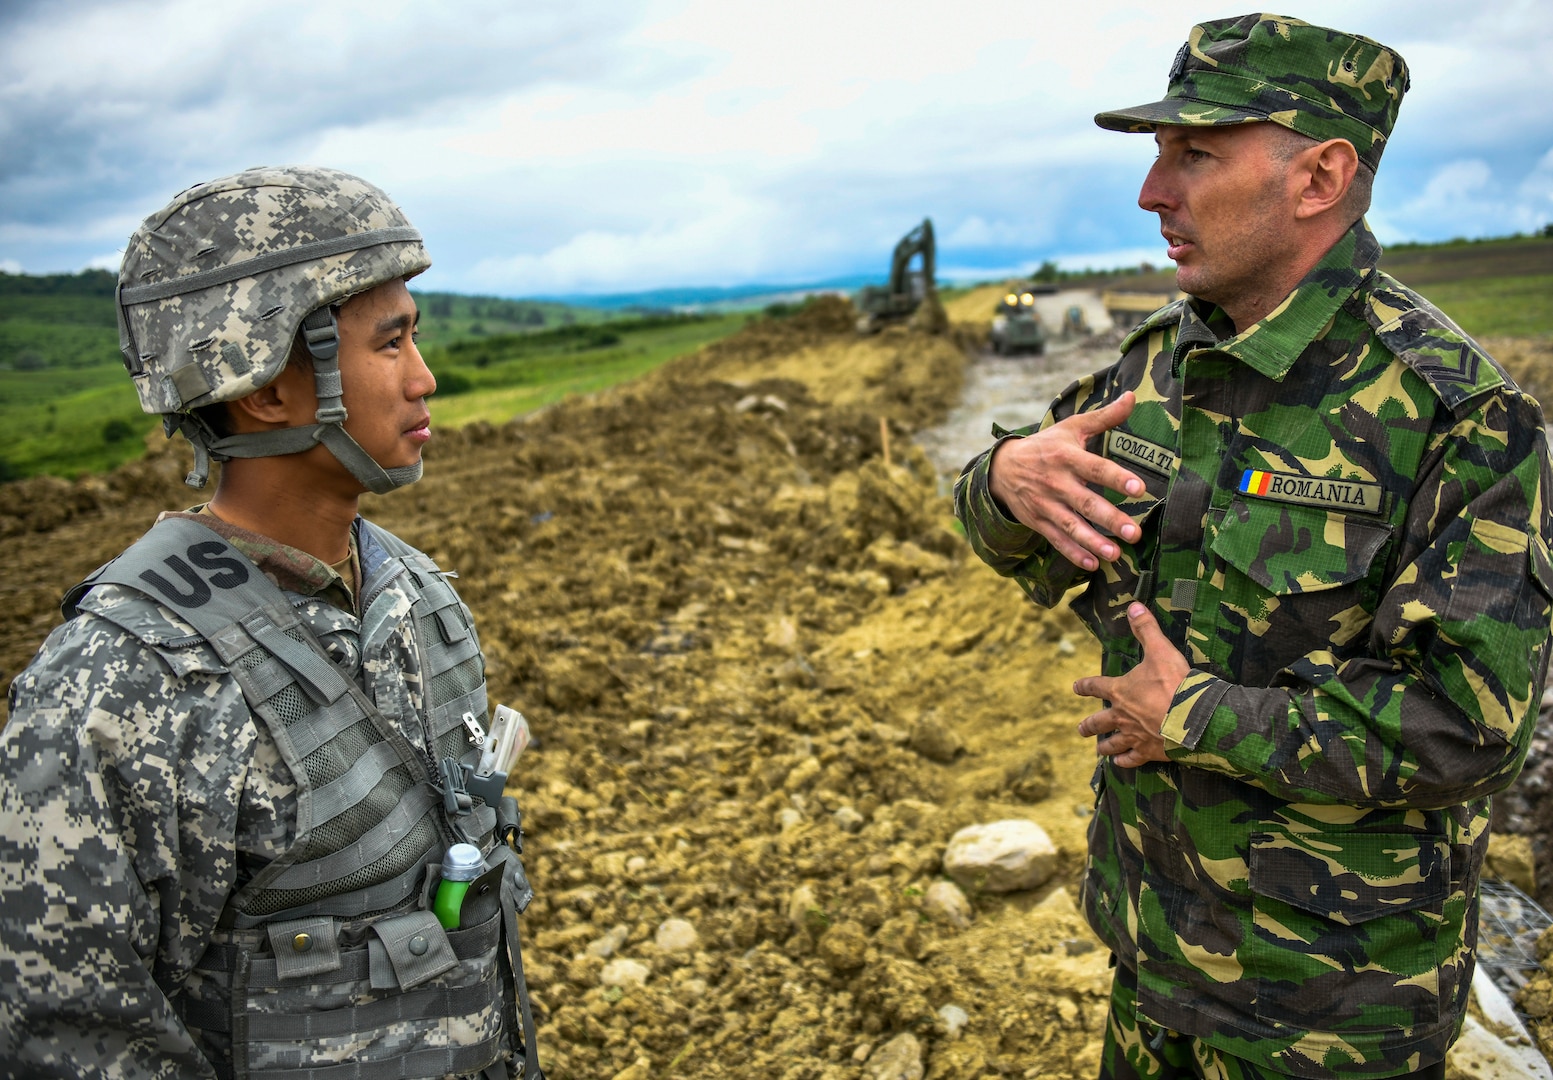 Second Lt. Vincent Owyong, of the 240th Engineer Company based in Las Vegas, Nevada, speaks with a soldier from the Romanian Land Forces (who chooses to be unnamed) during a construction project in Cincu, Romania, May 31st, 2019. The project is part of exercise Resolute Castle 2019, a multi-national joint exercise with real-world outputs of completed construction projects that build and enhance training capabilities around Eastern Europe.